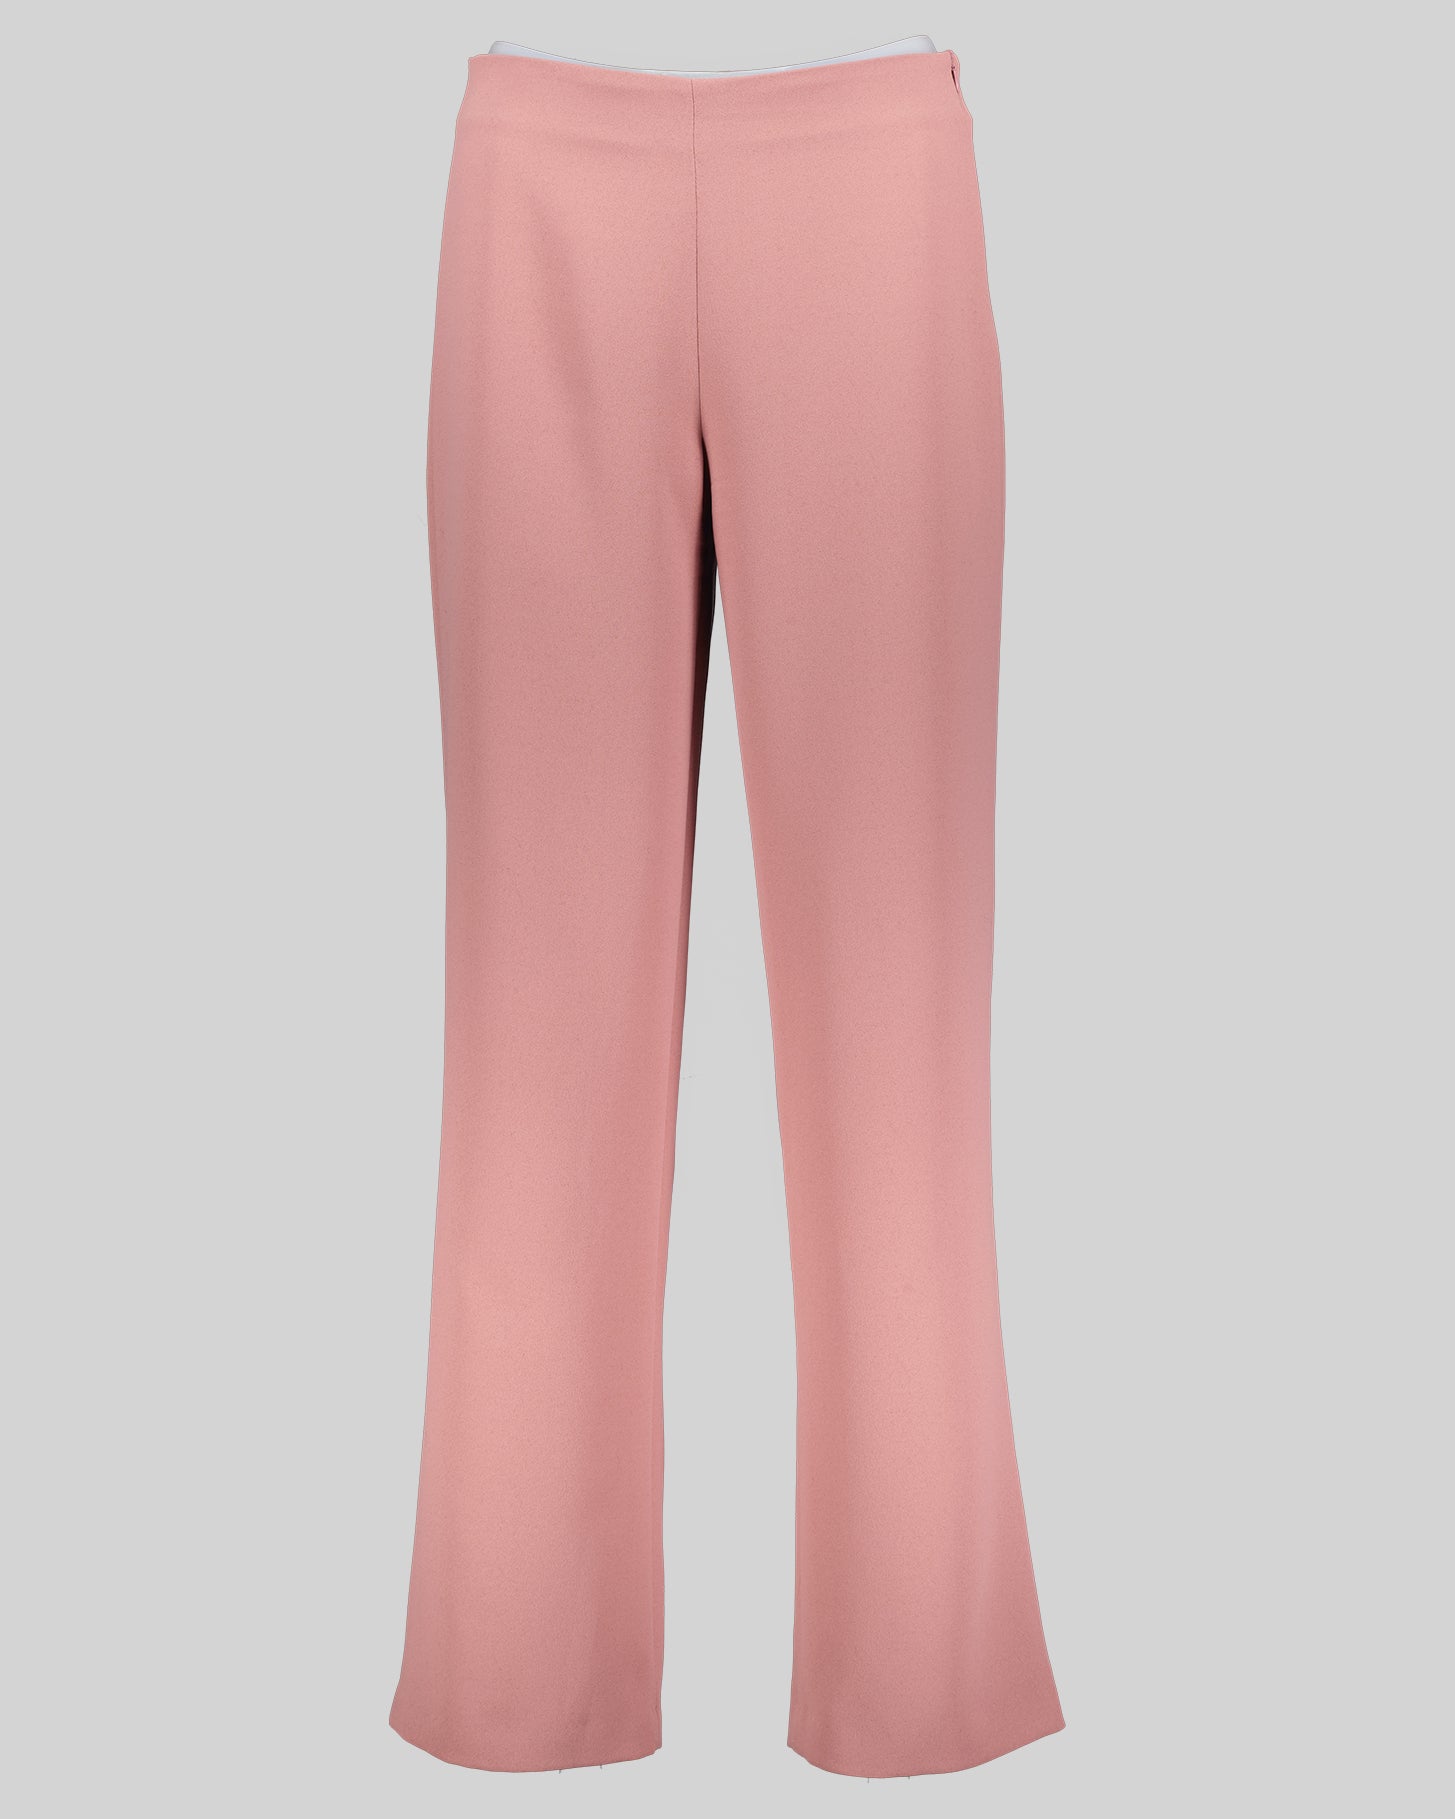 Trousers Cora in Rosewood